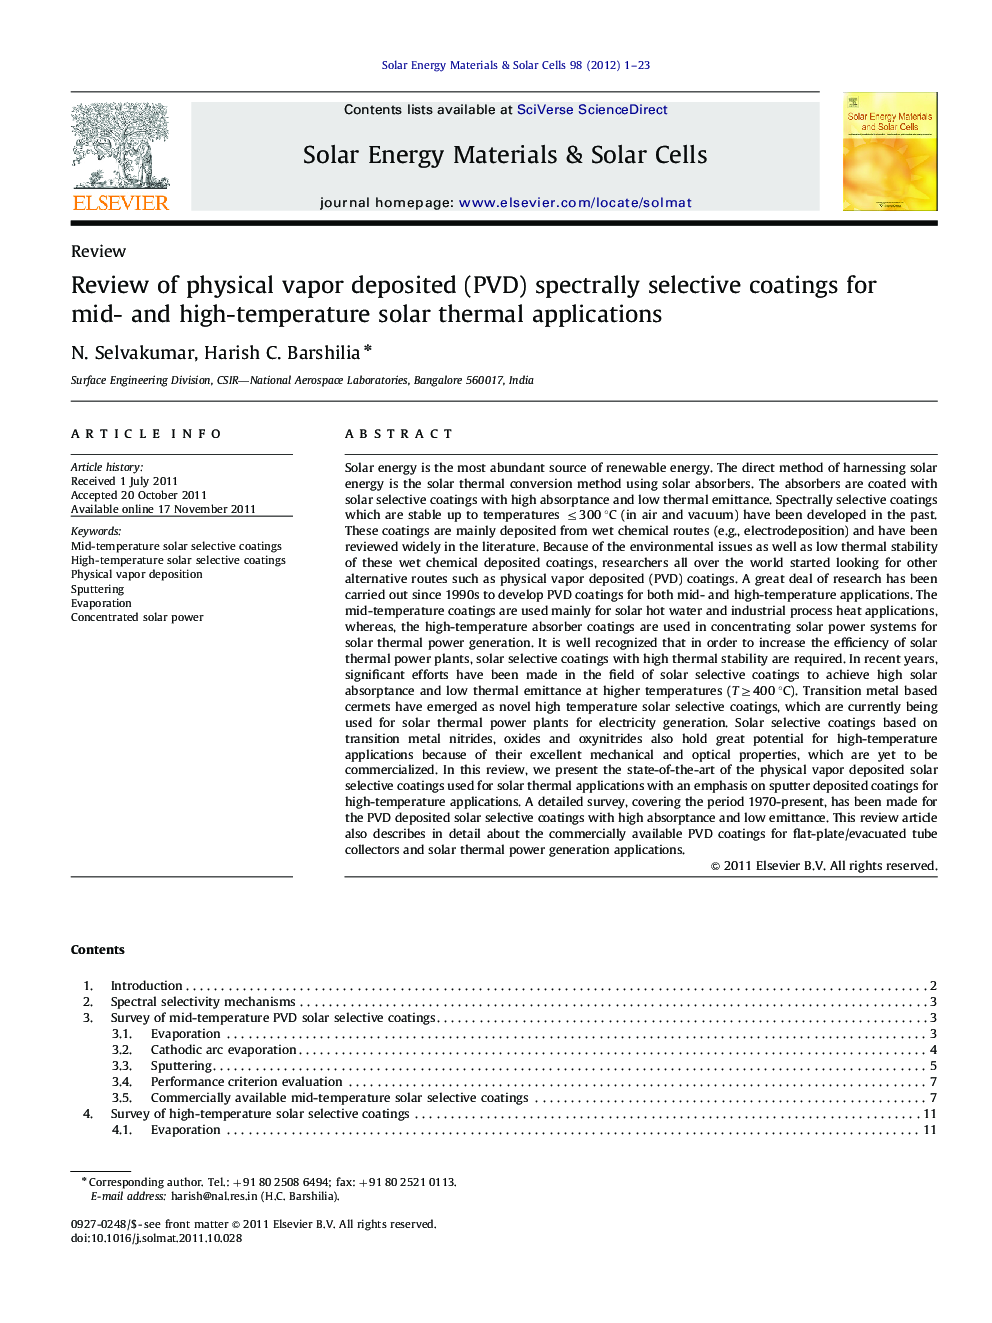 Review of physical vapor deposited (PVD) spectrally selective coatings for mid- and high-temperature solar thermal applications